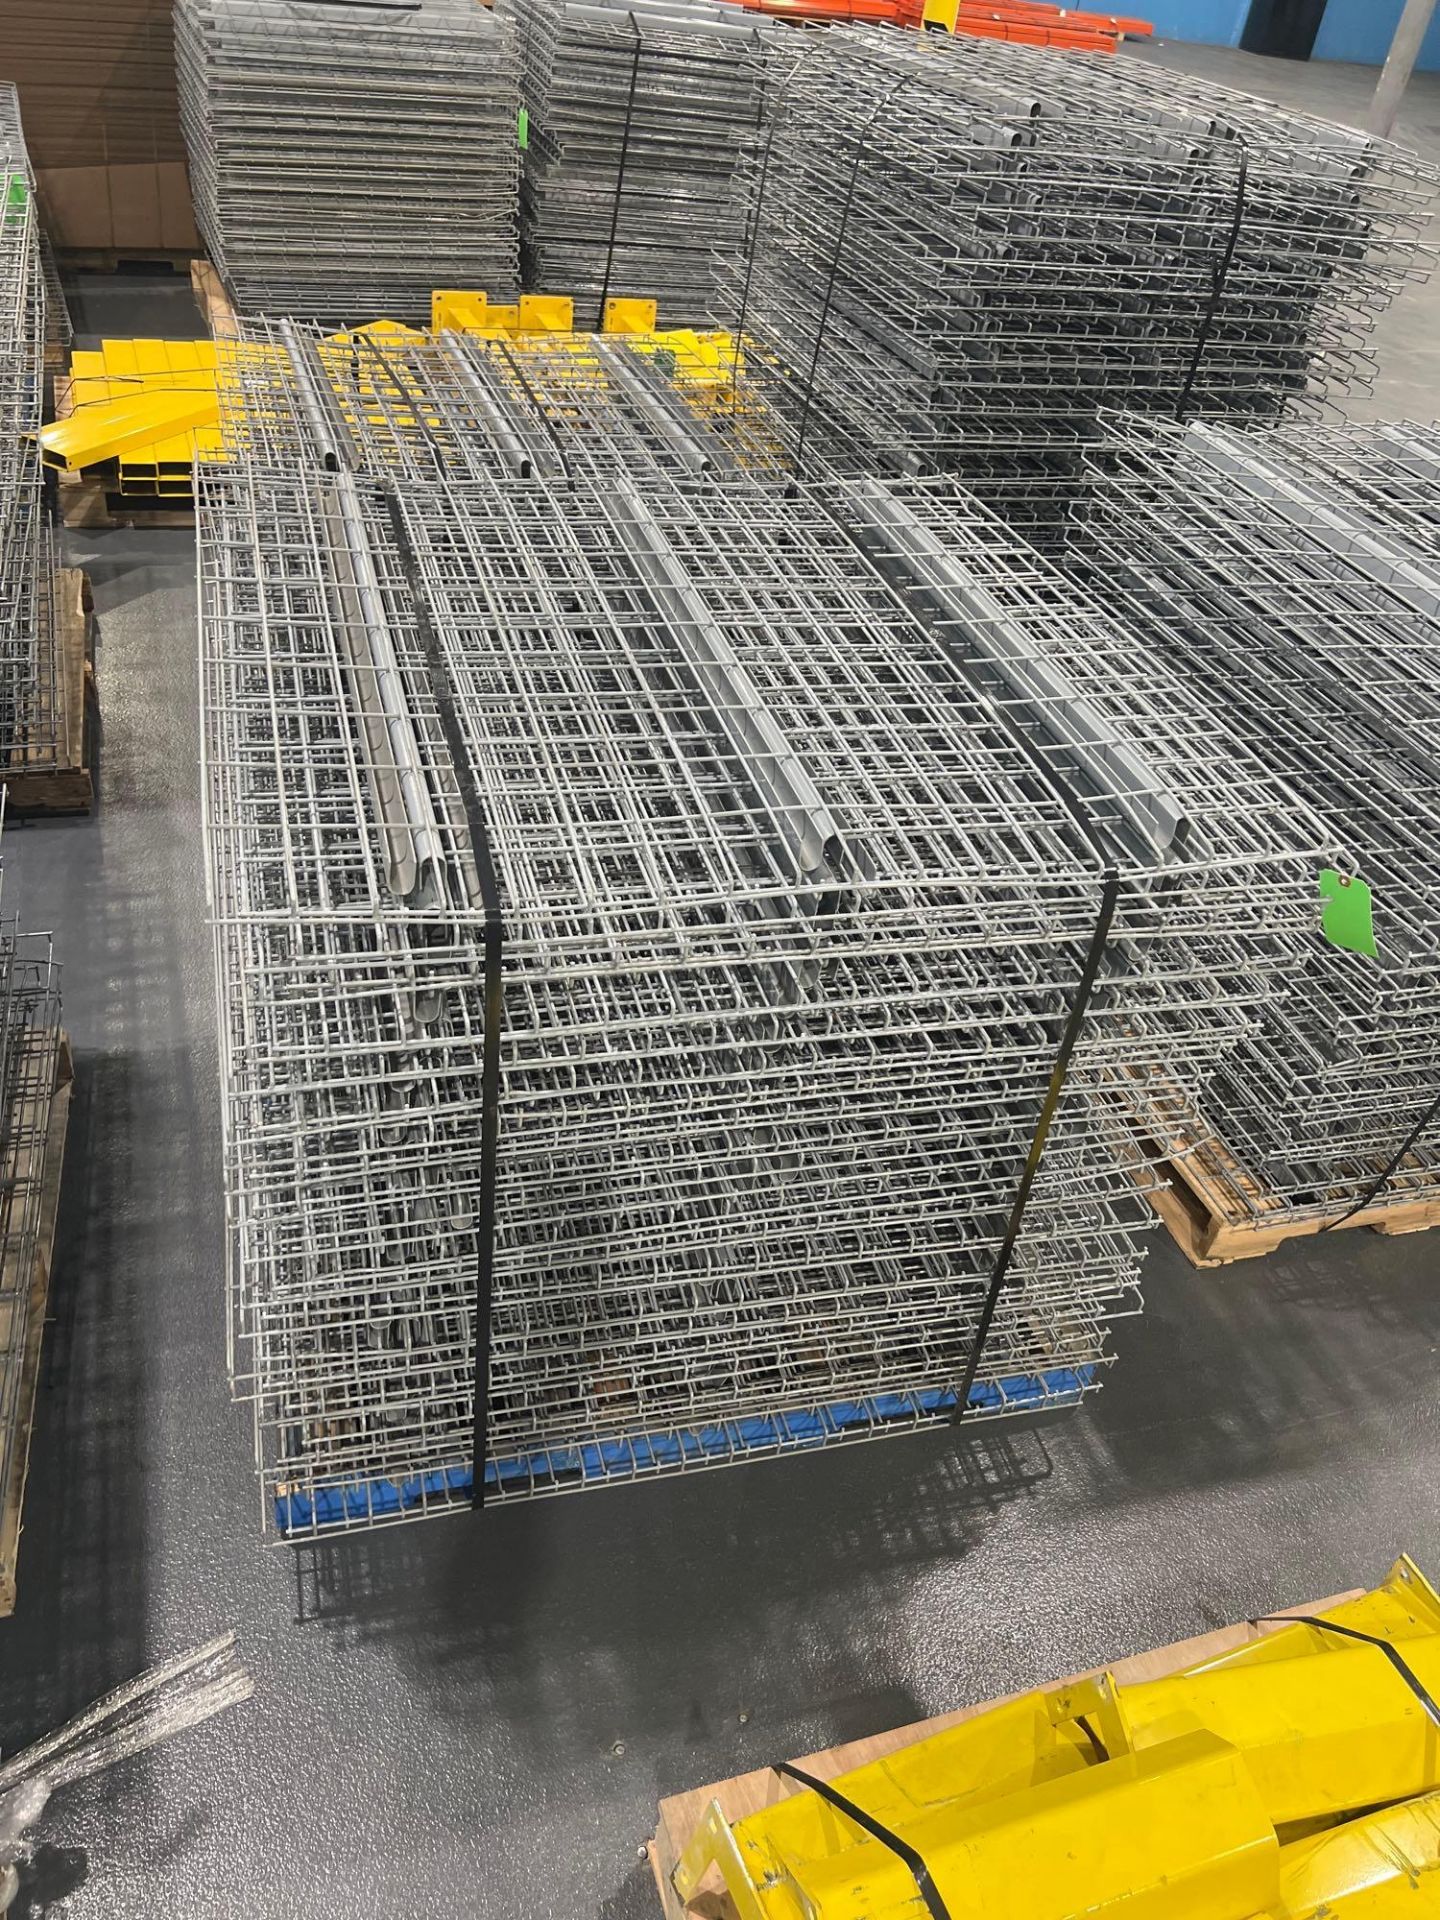 PALLET OF APPROX. 39 WIRE GRATES FOR PALLET RACKING, APPROX. DIMENSIONS 43" X 45" - Image 5 of 5